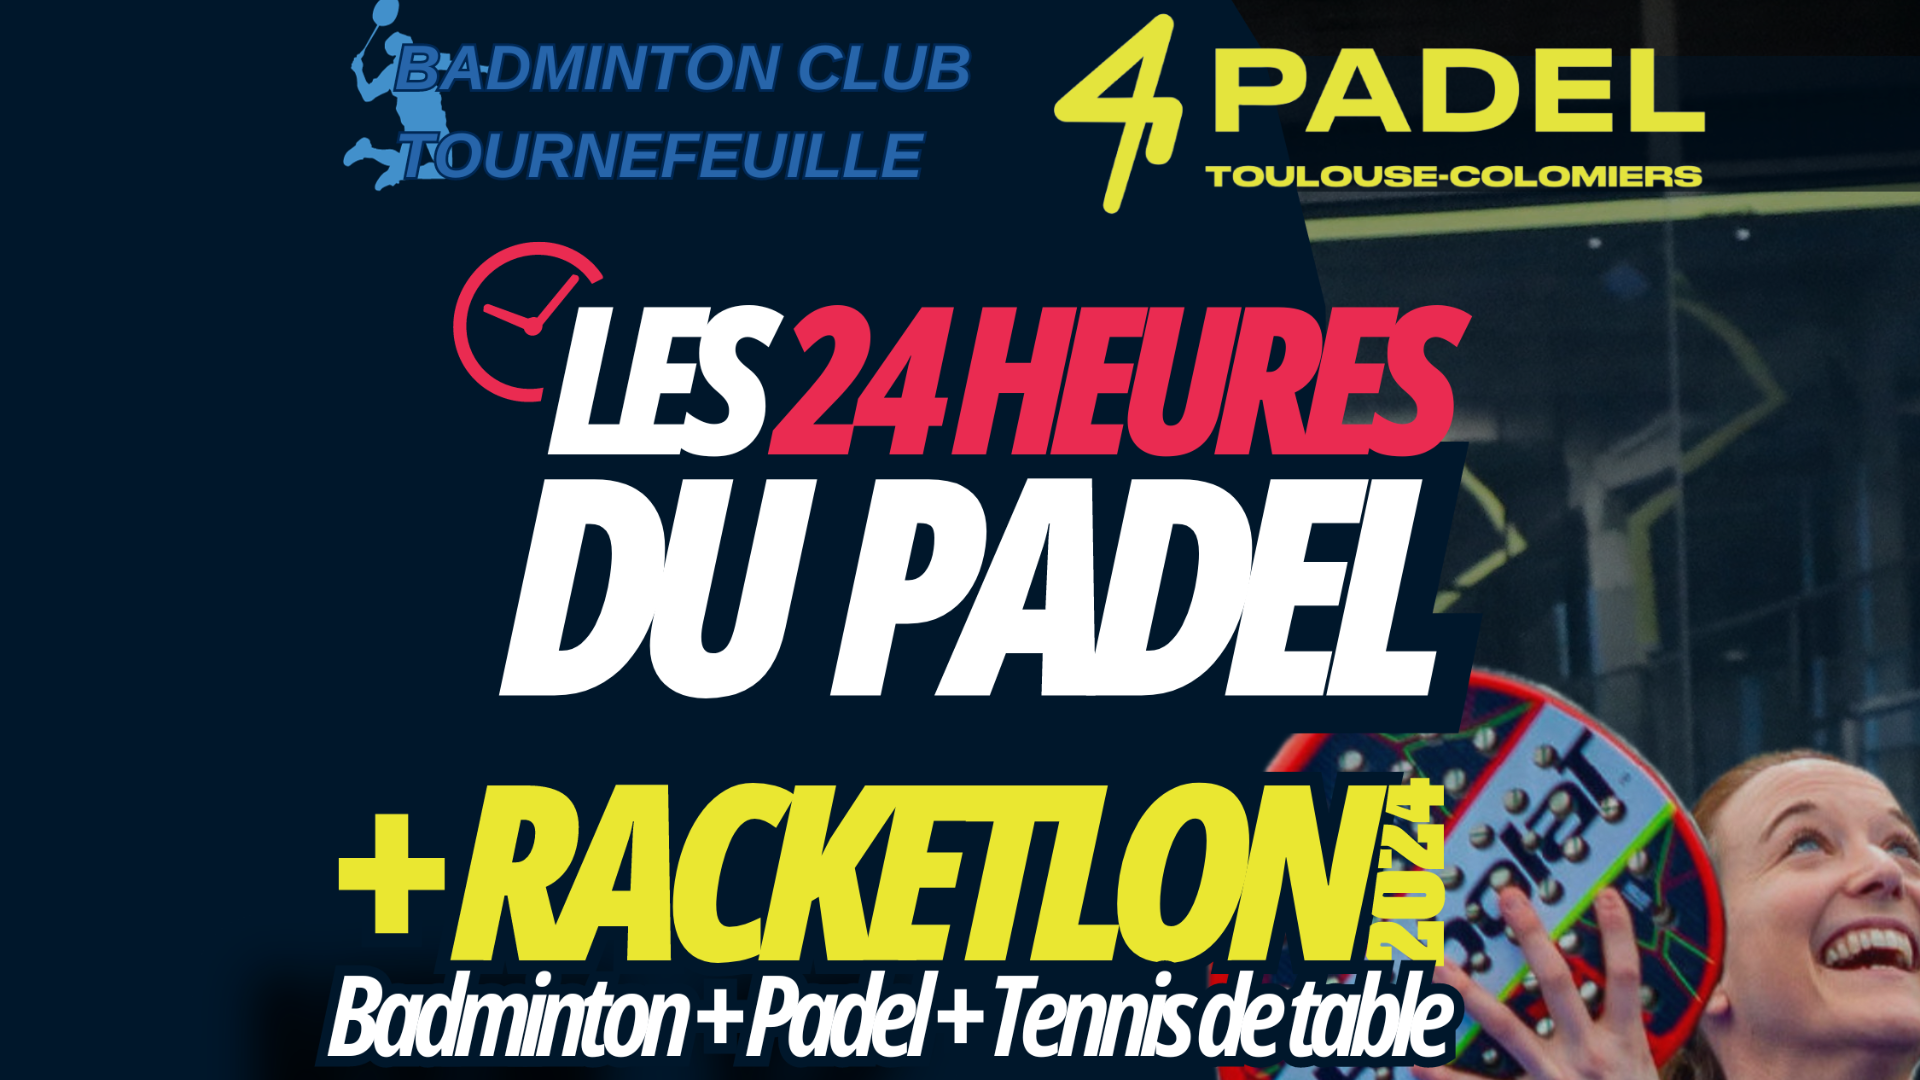 A weekend of sport and solidarity on 4Padel Toulouse Colomiers